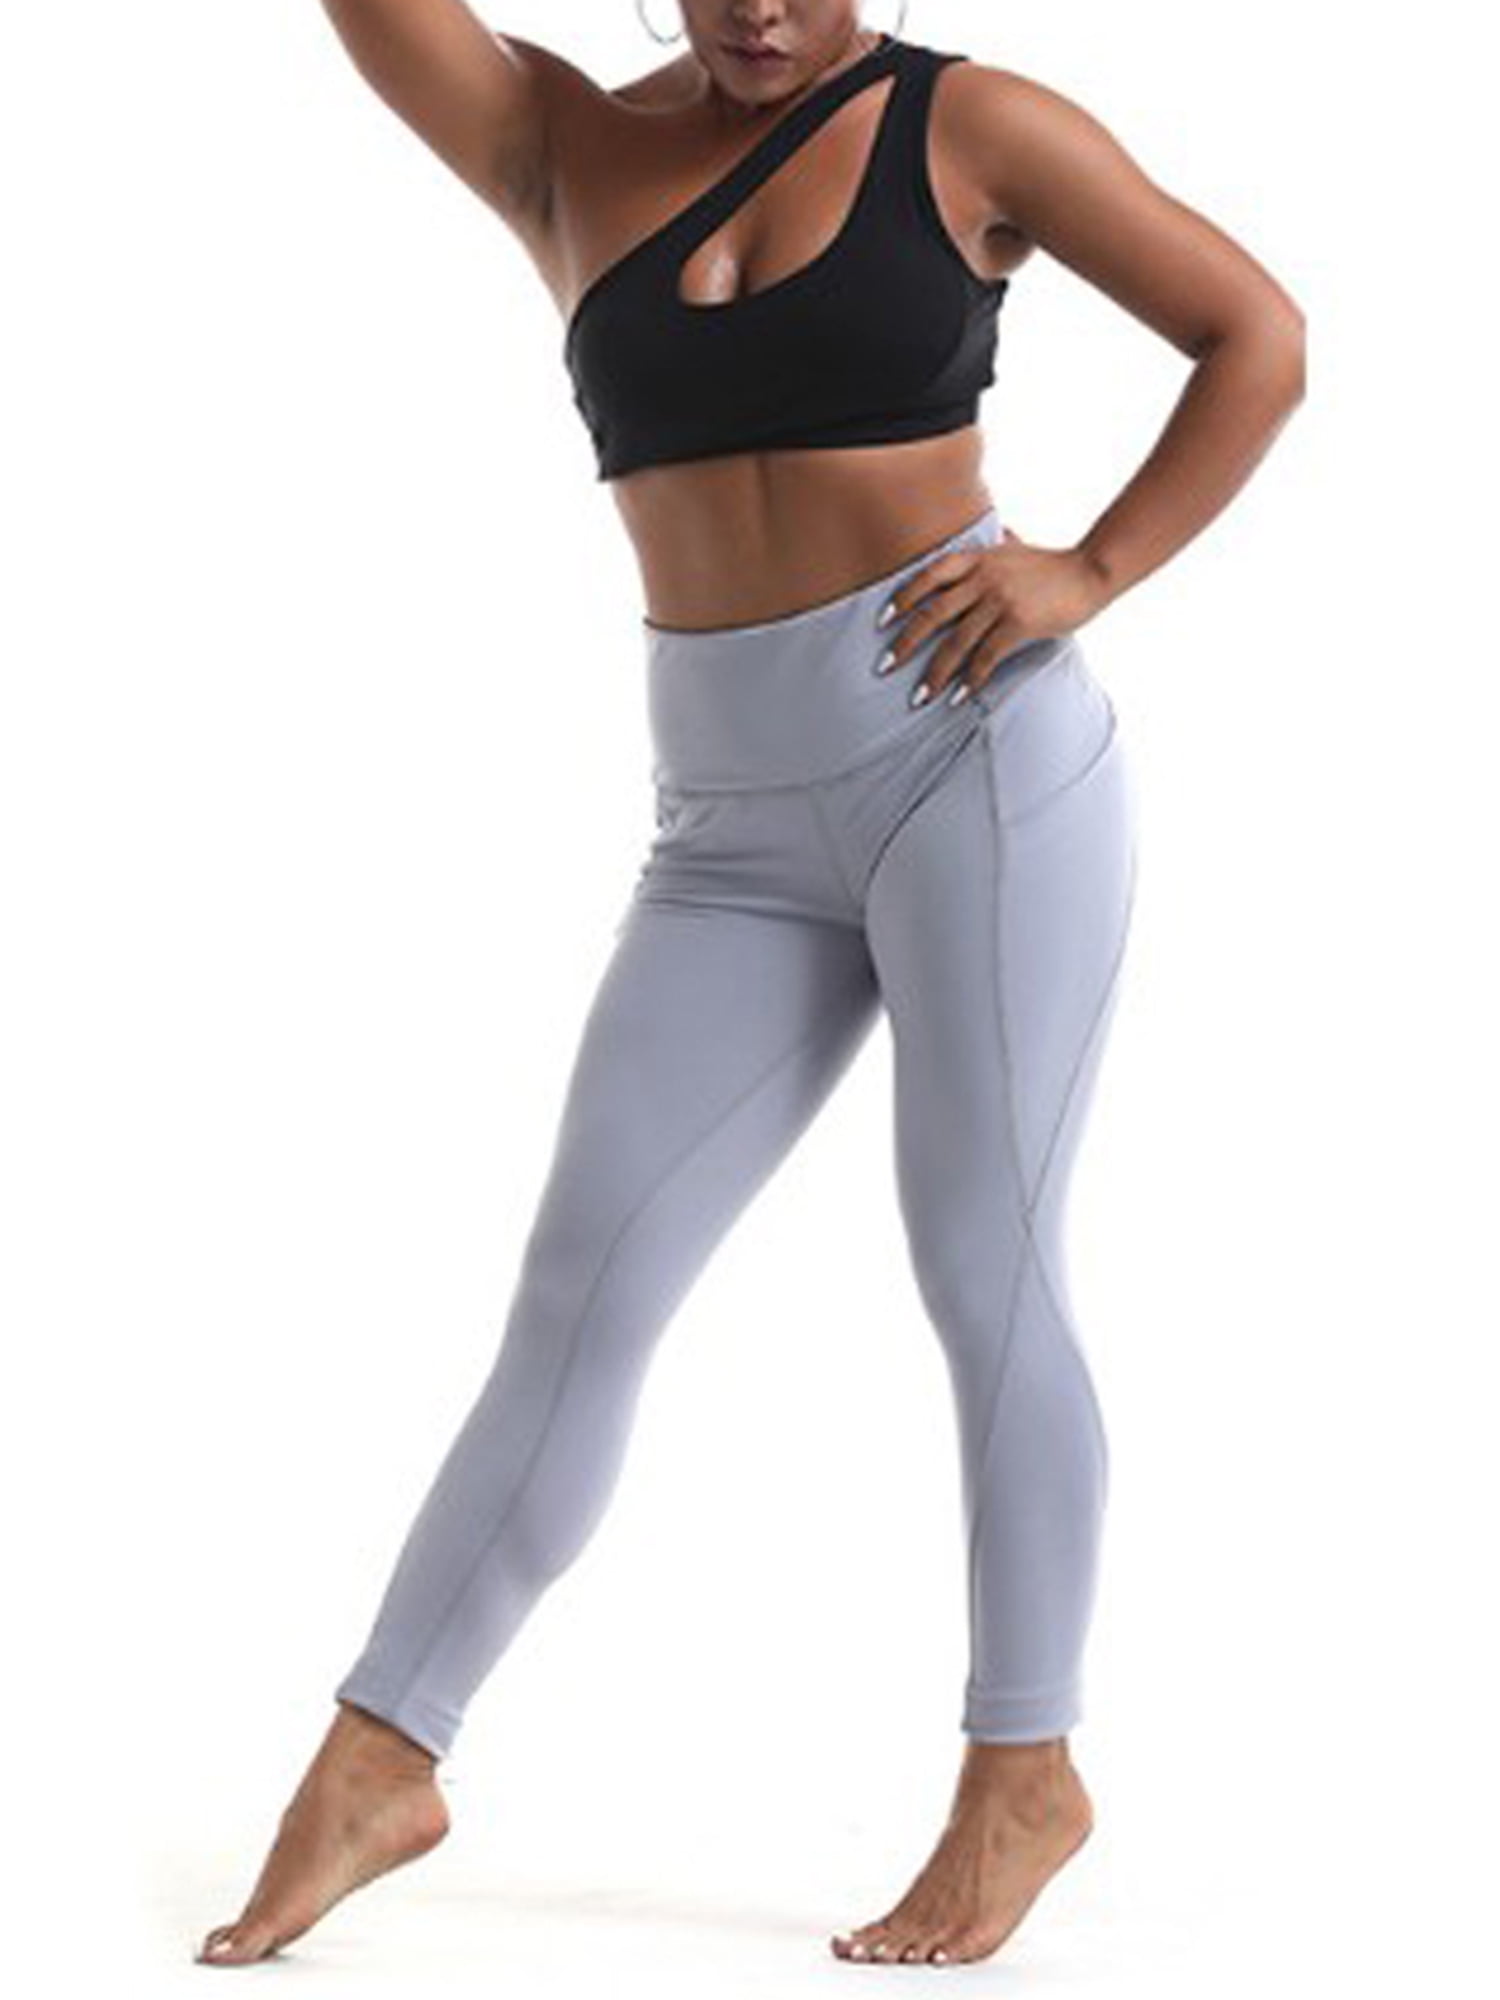 Details about   Women High Waist Yoga Pants Gym Leggings Workout Fitness Gym Trousers W/Pockets 